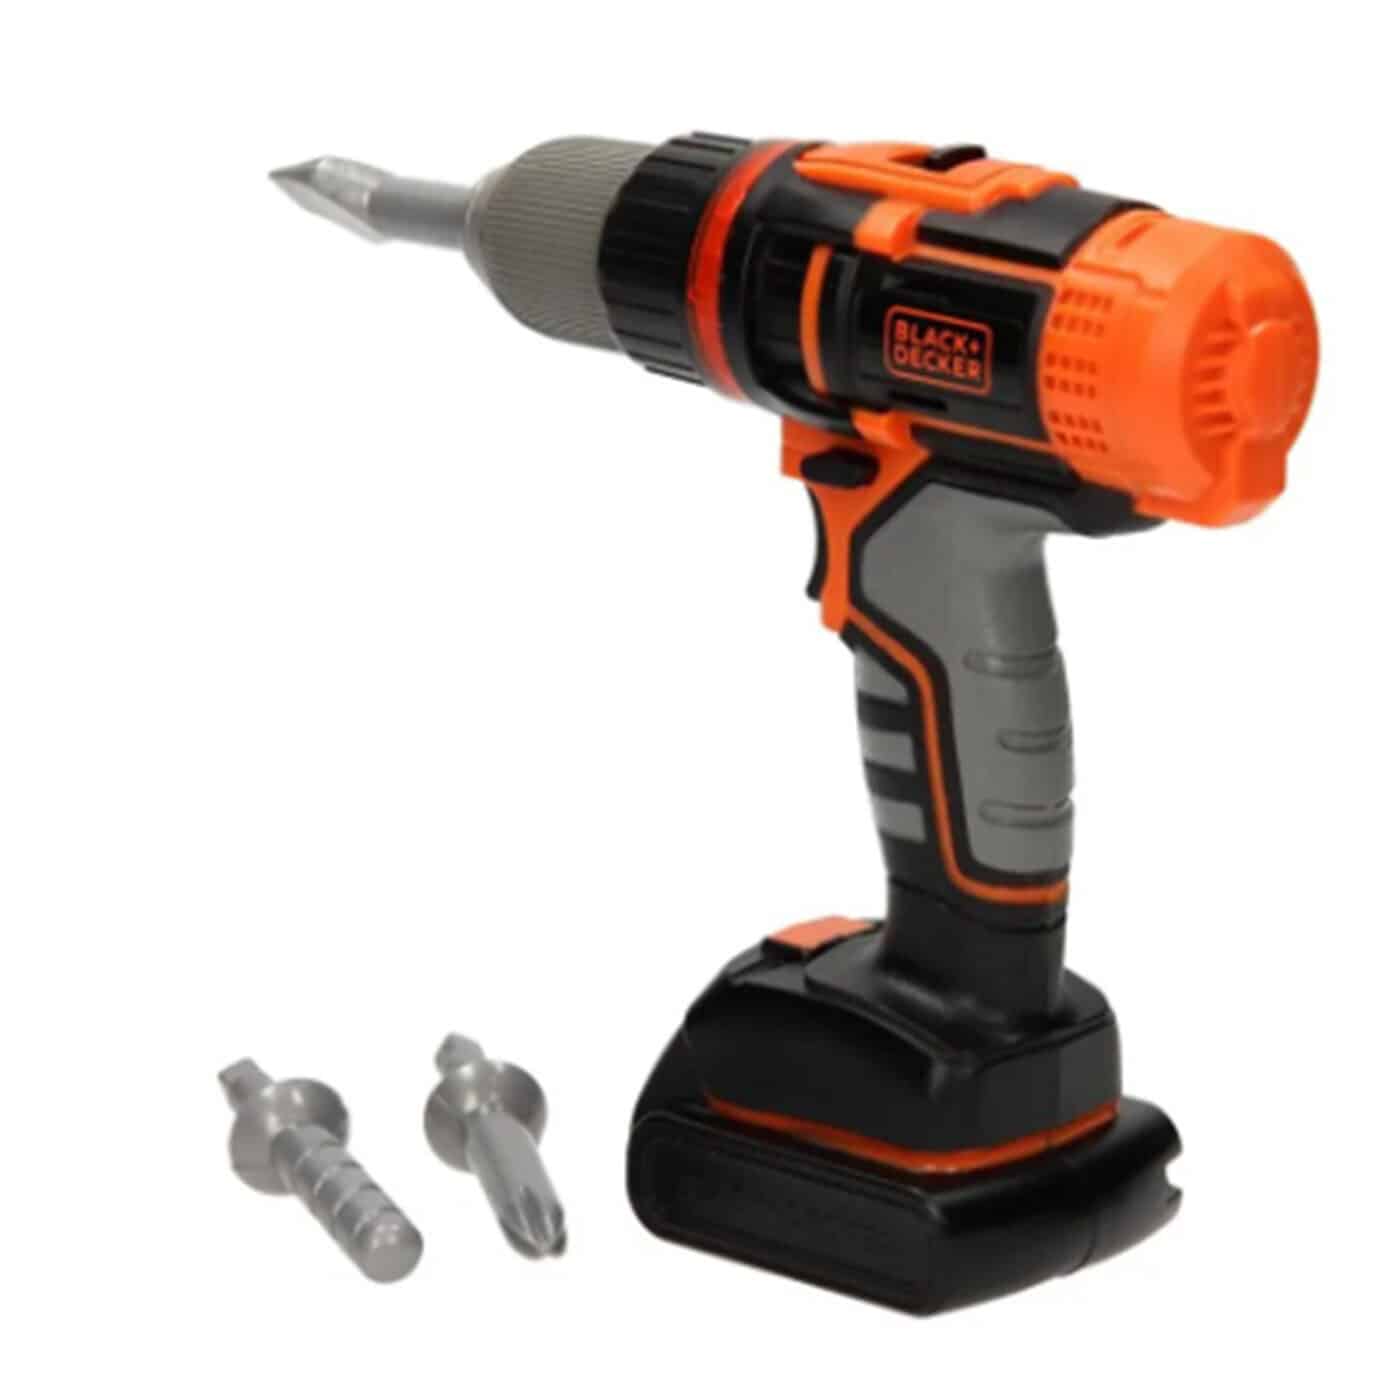 Smoby - Black & Decker Electric Drill Toy-2